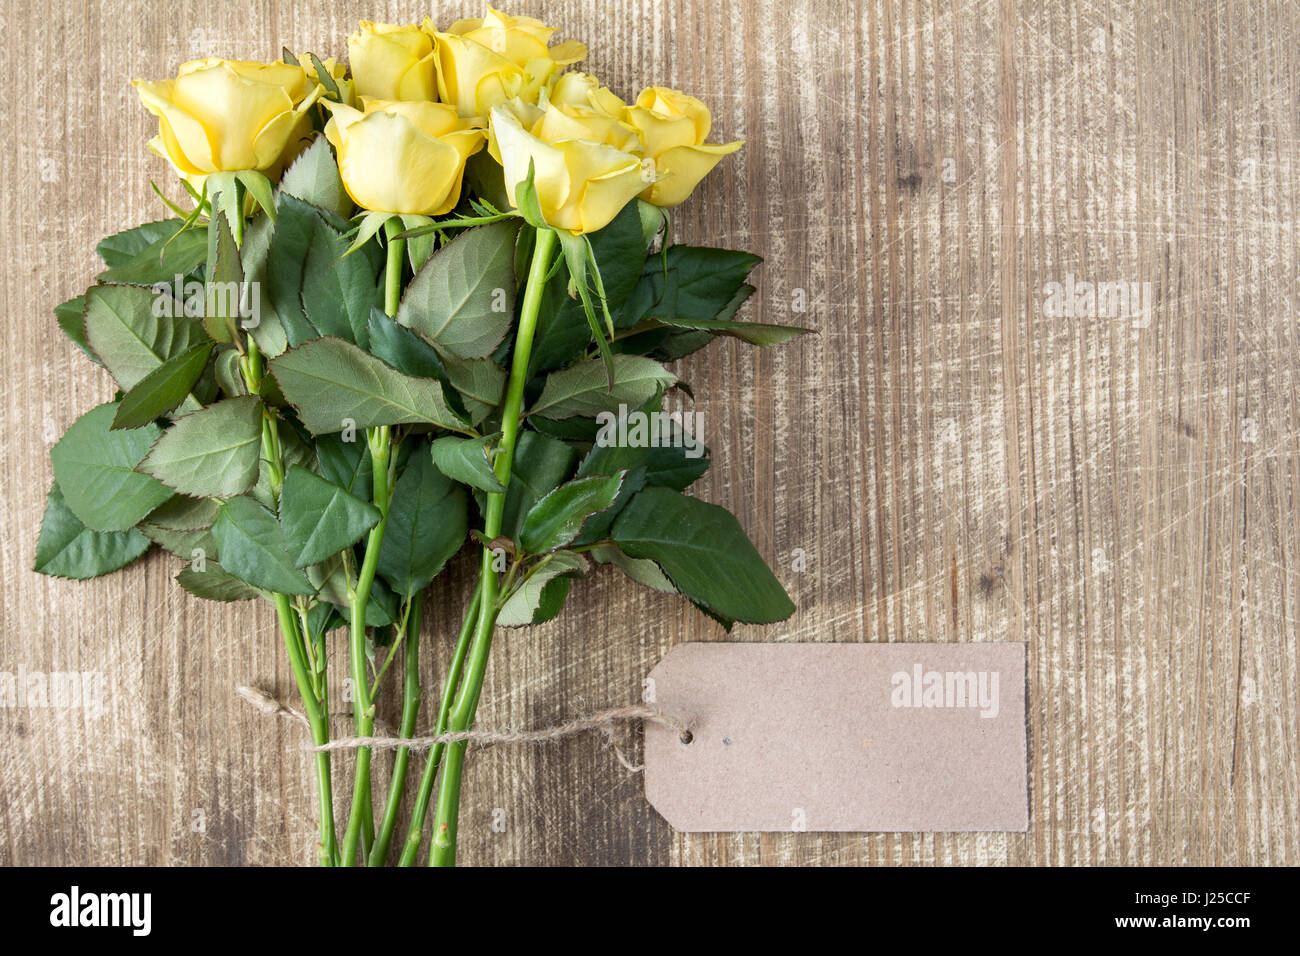 Bunch of yellow roses with blank tag tied with string Stock Photo